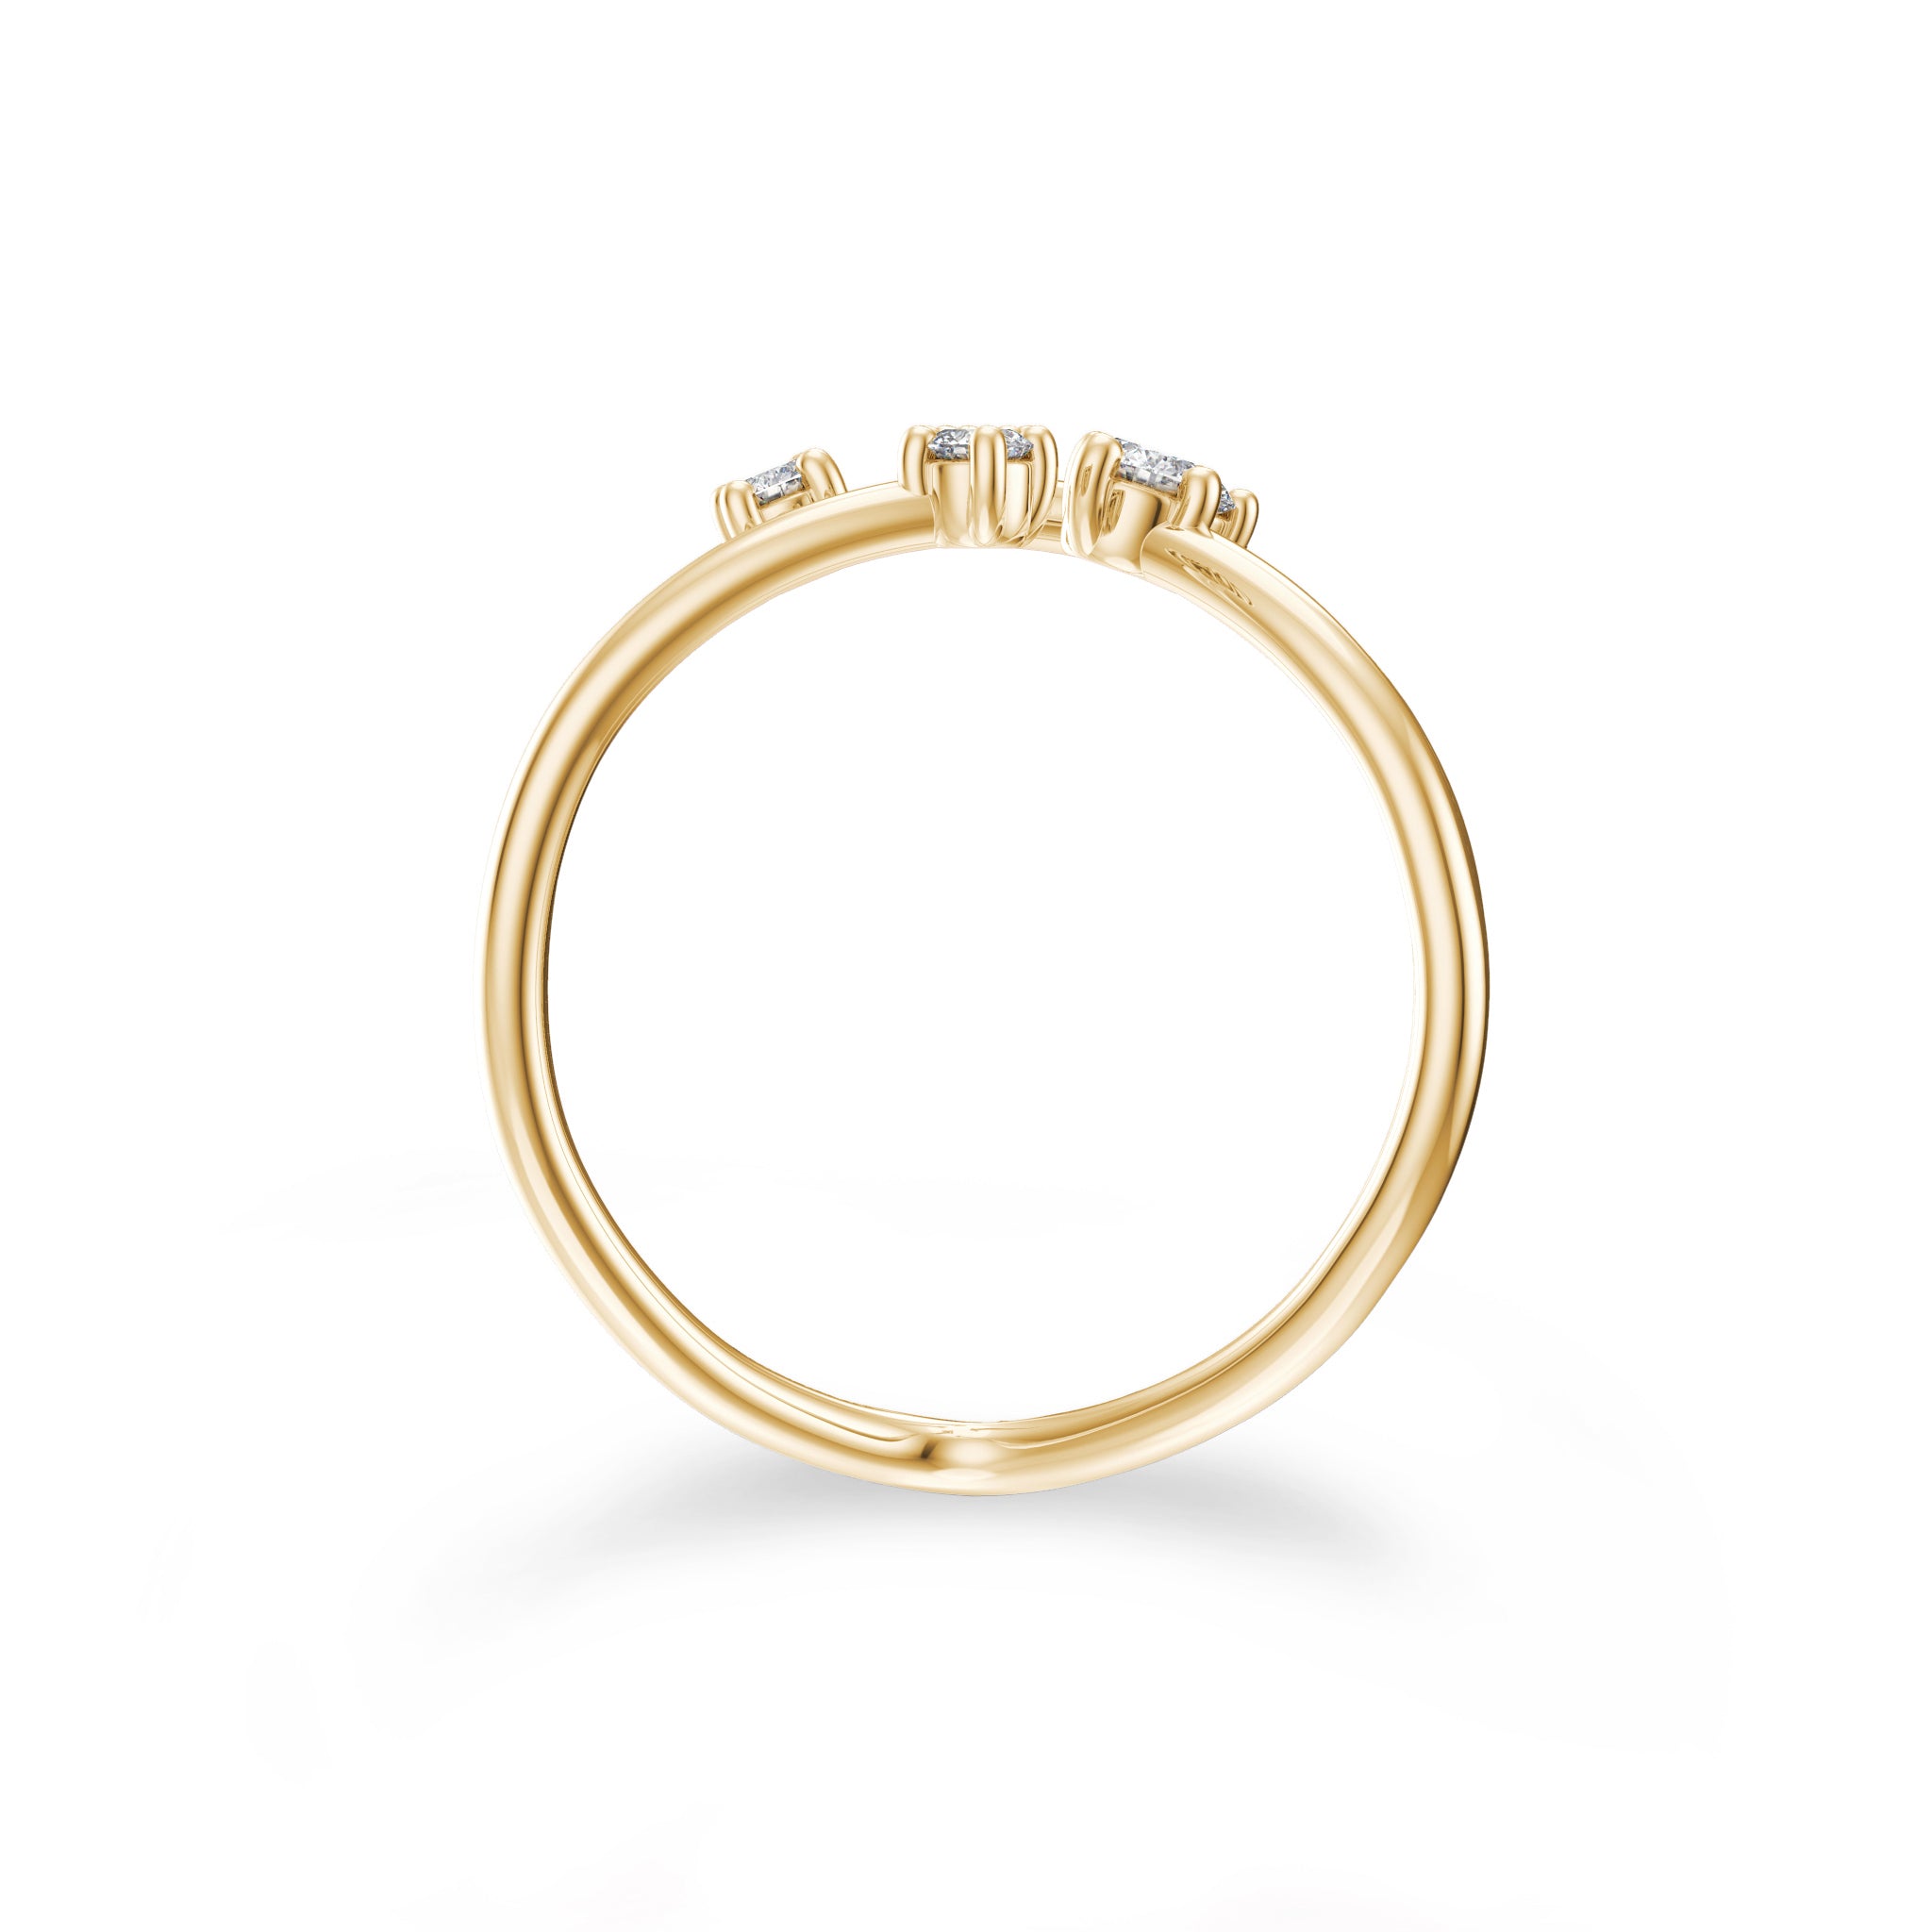 Shimansky - Southern Cross Large Diamond Ring Crafted in 14K Yellow Gold